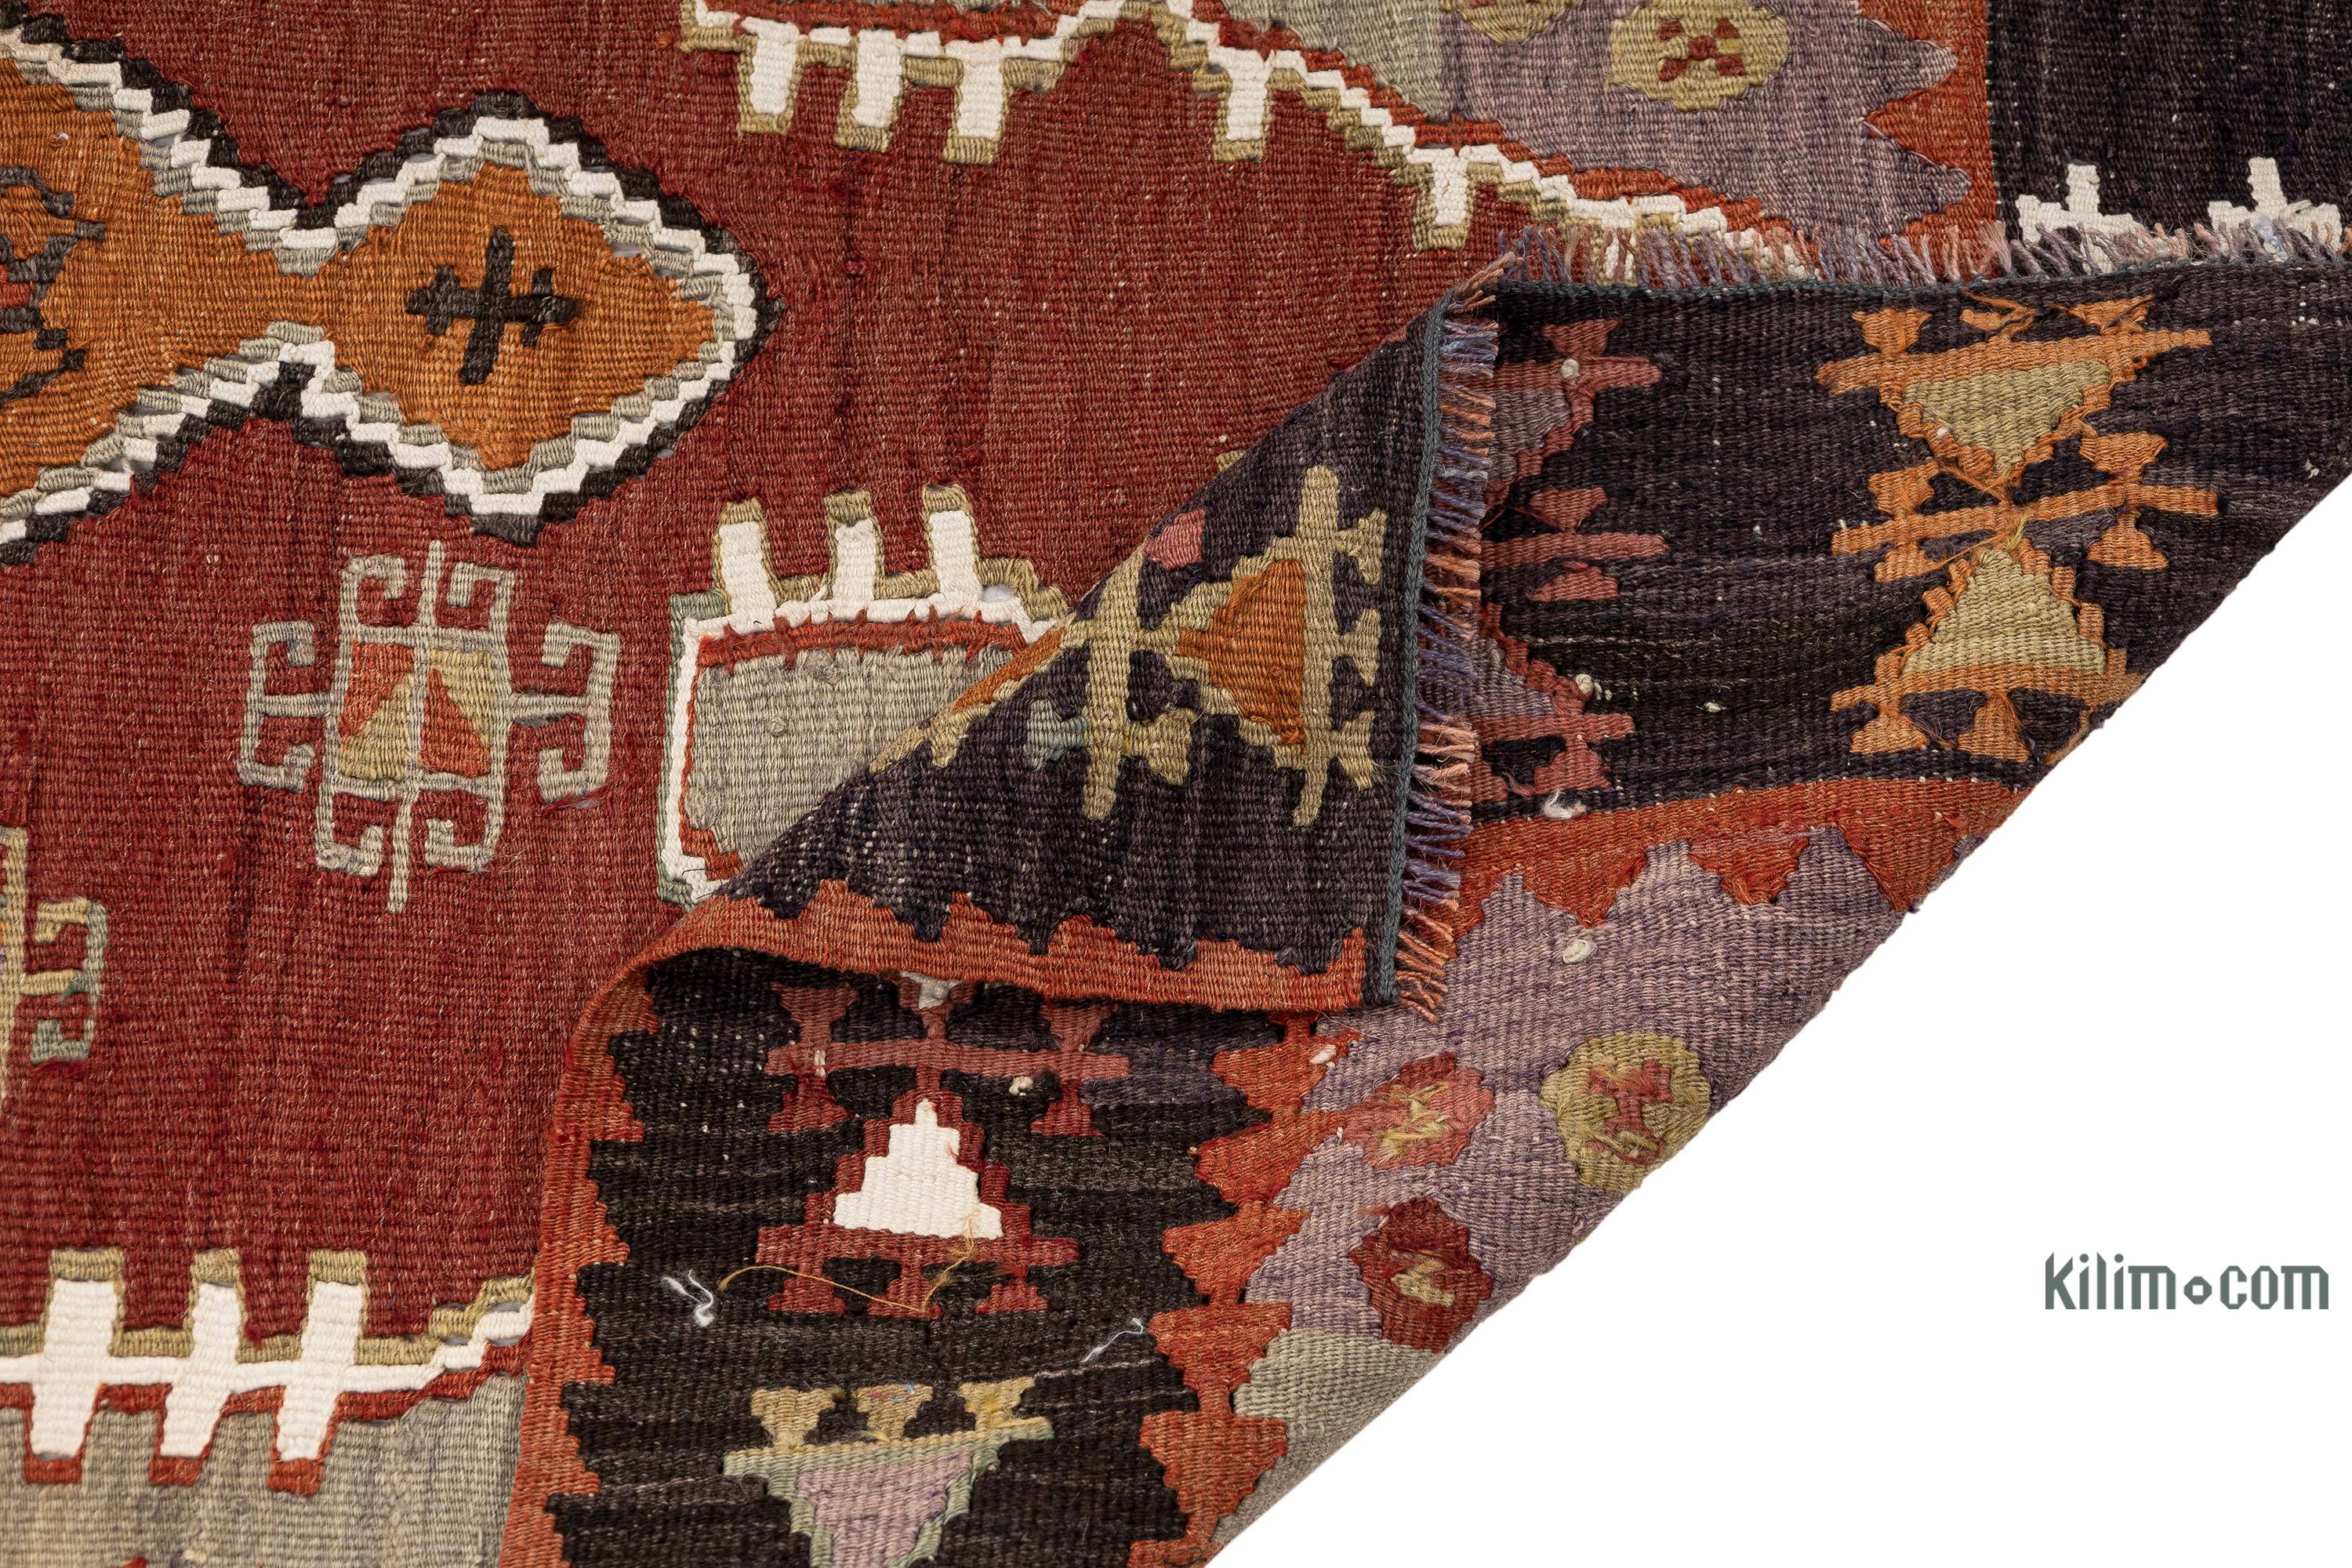 K0068186 Vintage Afyon Kilim Rug - 3' 4 x 4' 8 (40 x 56)  The Source  for Vintage Rugs, Tribal Kilim Rugs, Wool Turkish Rugs, Overdyed Persian  Rugs, Runner Rugs, Patchwork